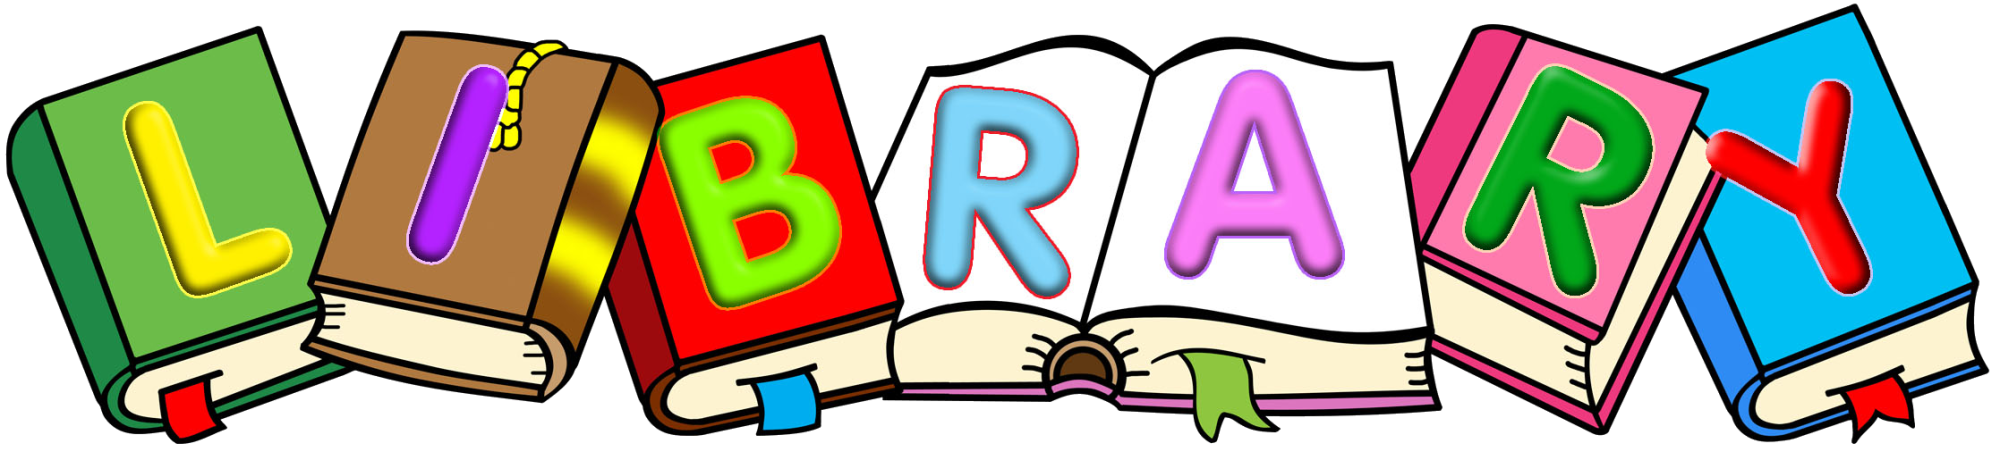 Library clipart books. Click here to download